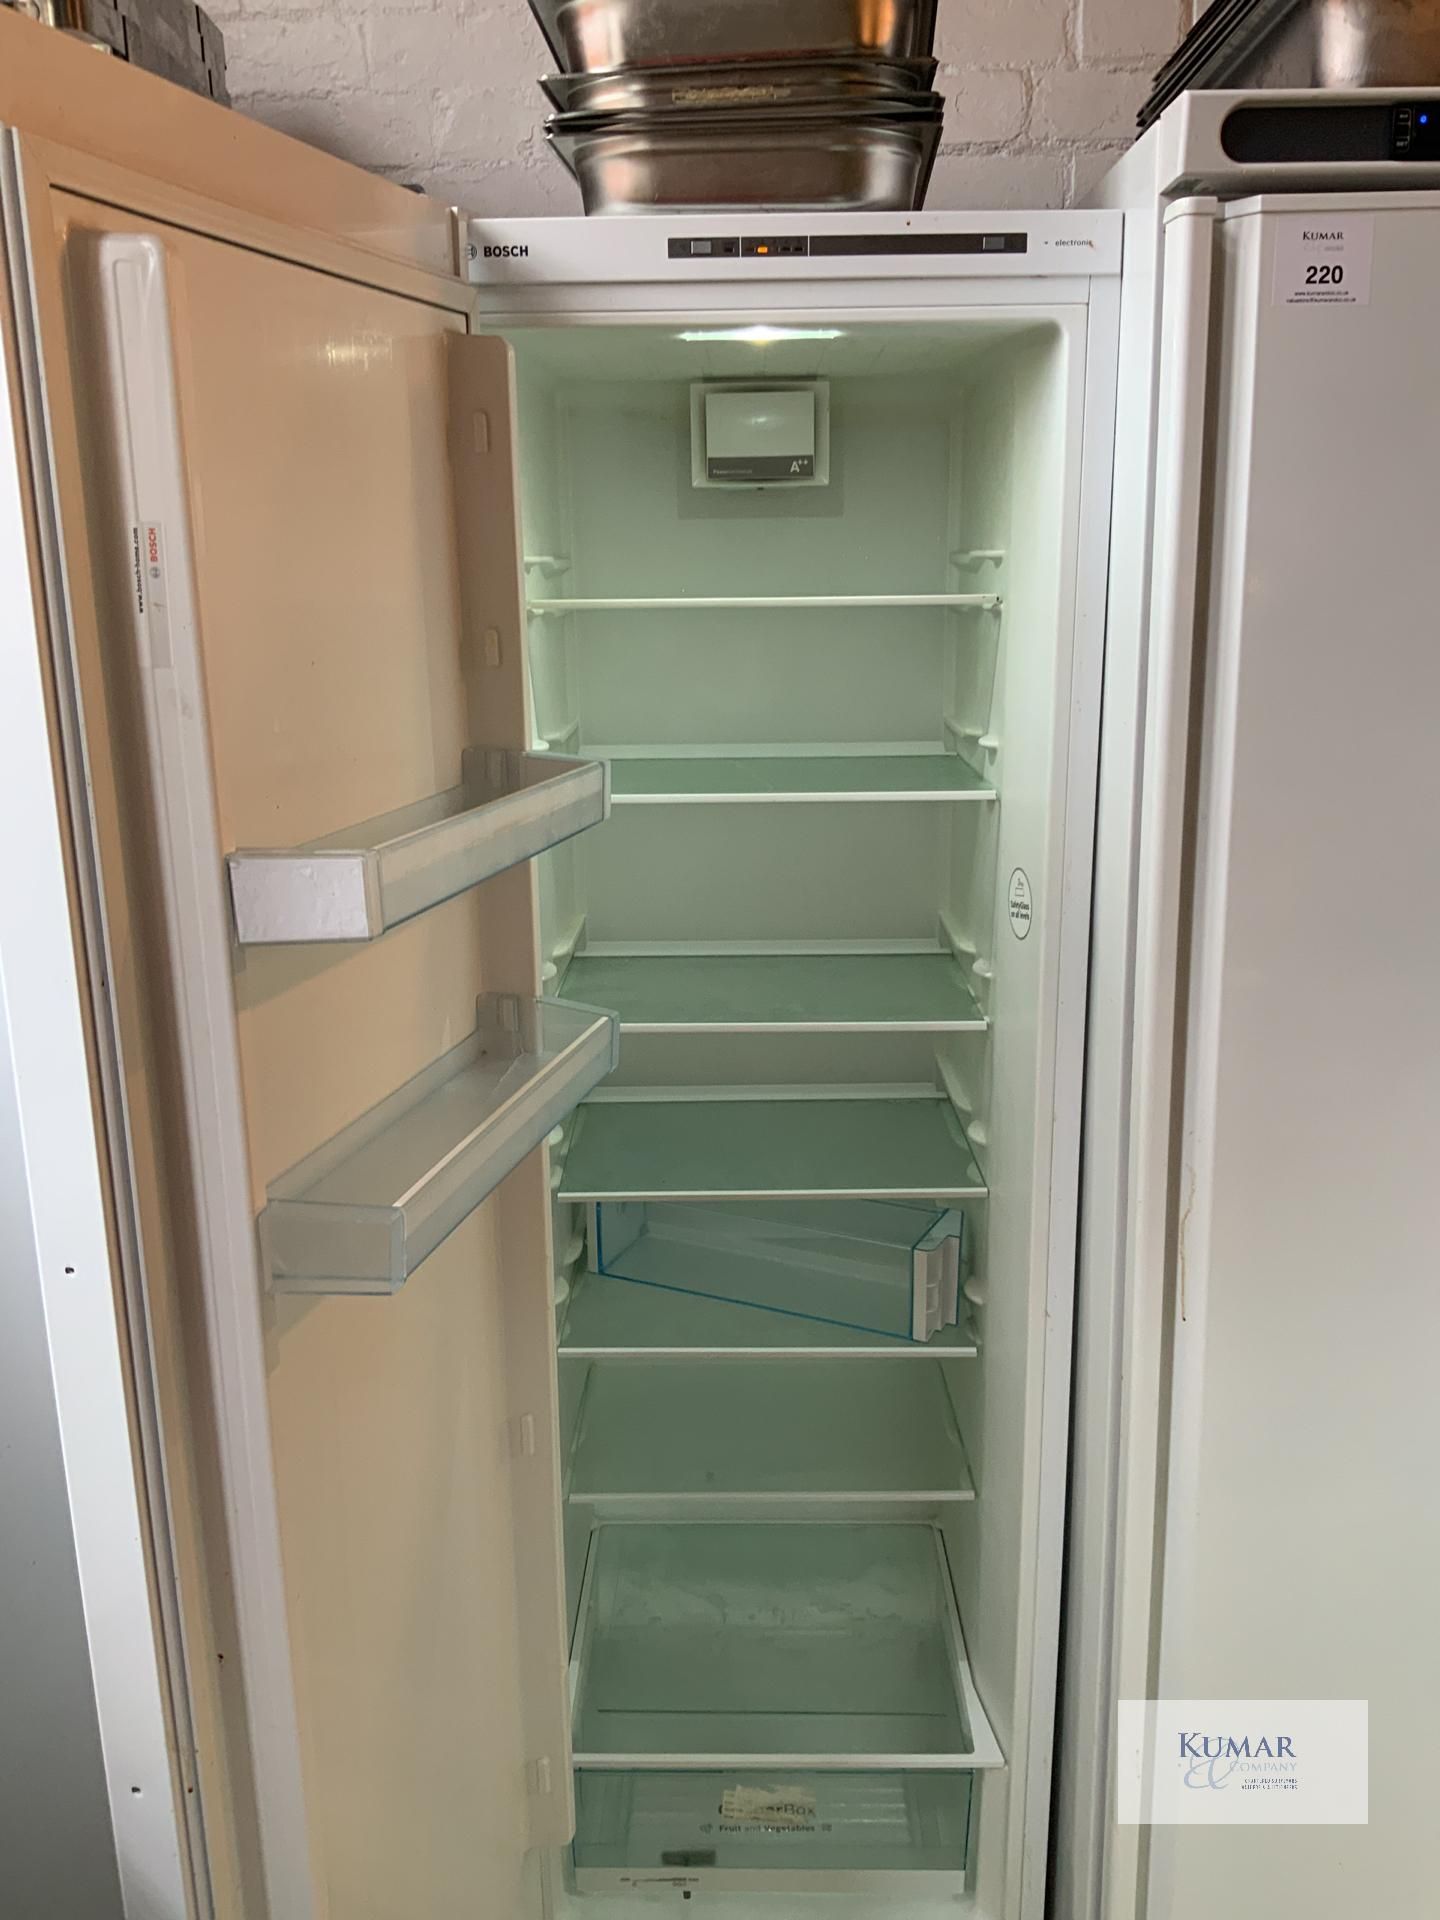 Bosch Upright Refrigerator. Please Note - This lot is located at Hengata Restaurant, 106 High - Image 5 of 6